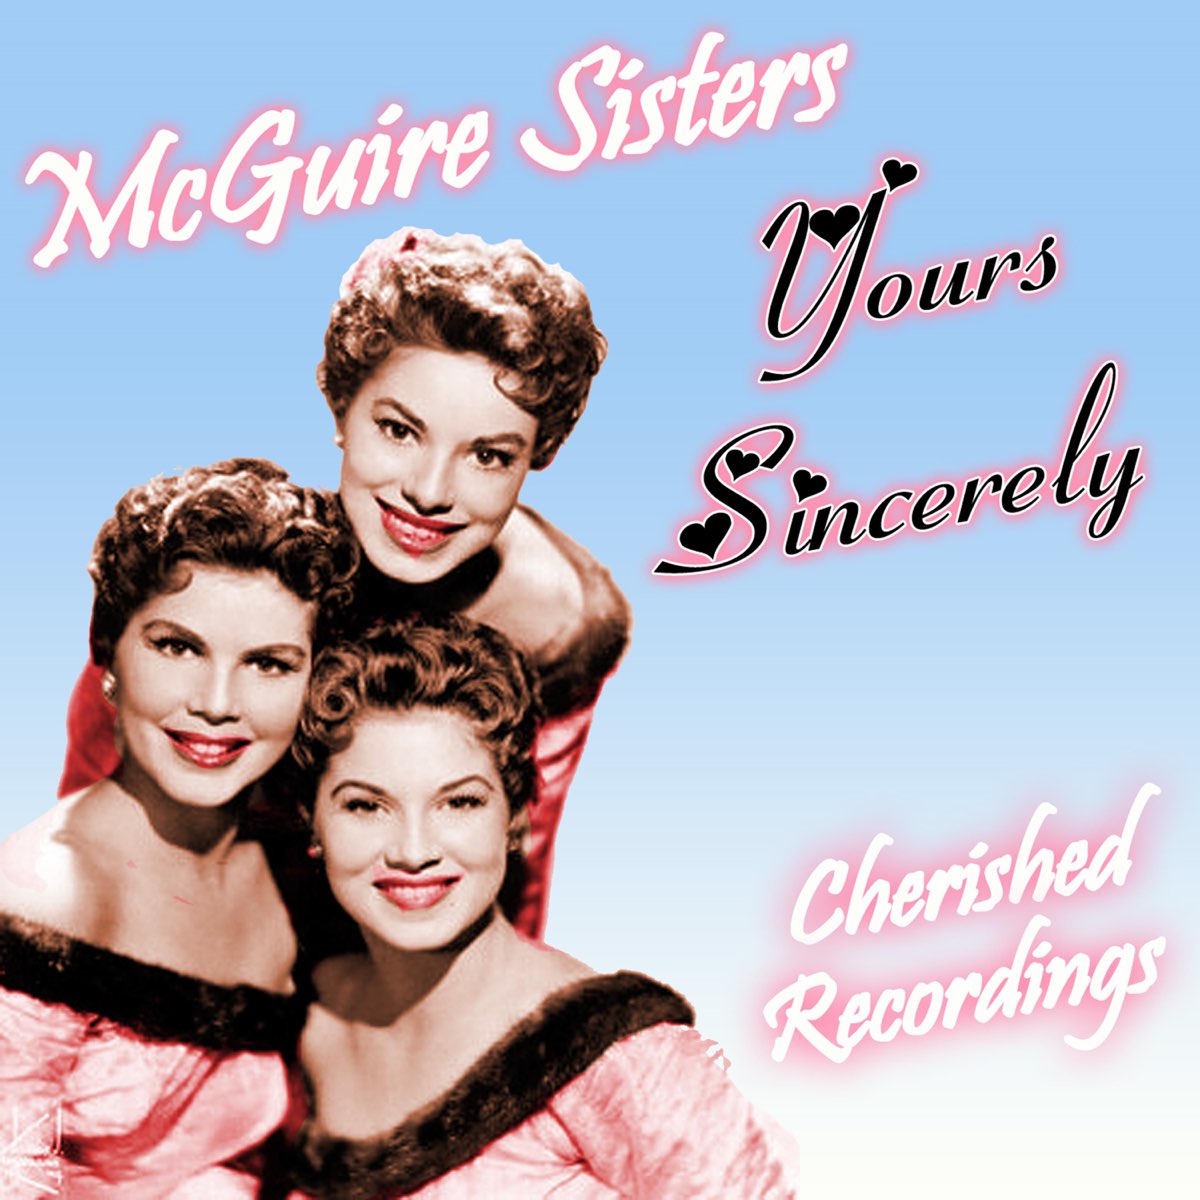 Sisters текст. MCGUIRE sisters Picnic 1956. True sisters. The Puppini sisters. Your sisters like you